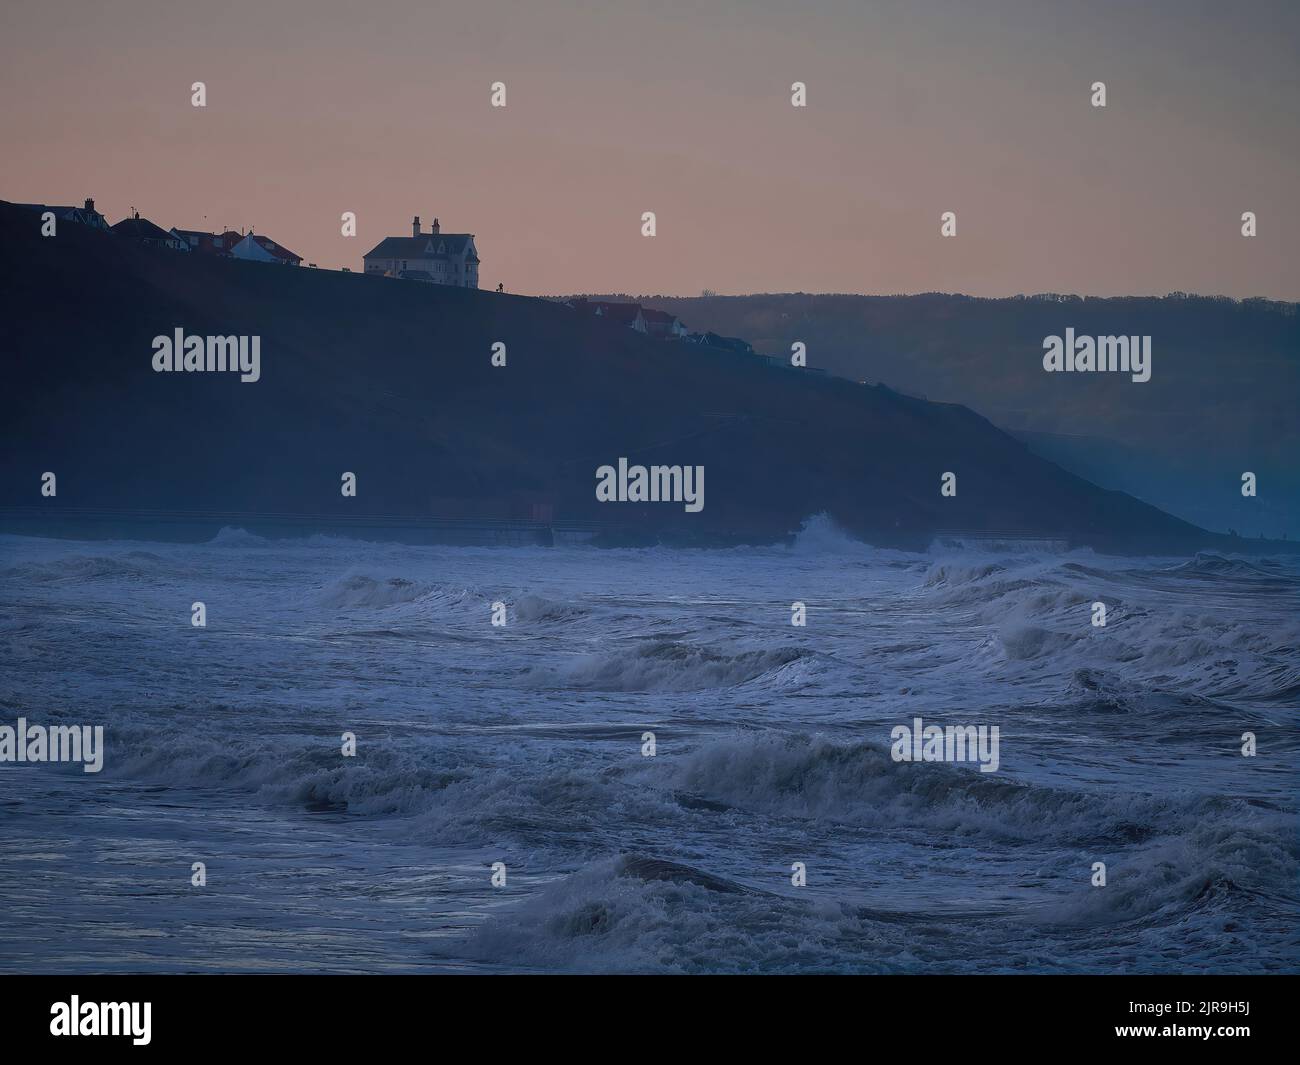 Angry storm waves crash into the bay between Whitby and Sandsend on the North Sea coast, as the winter sun sets behind the headland and cliffs. Stock Photo